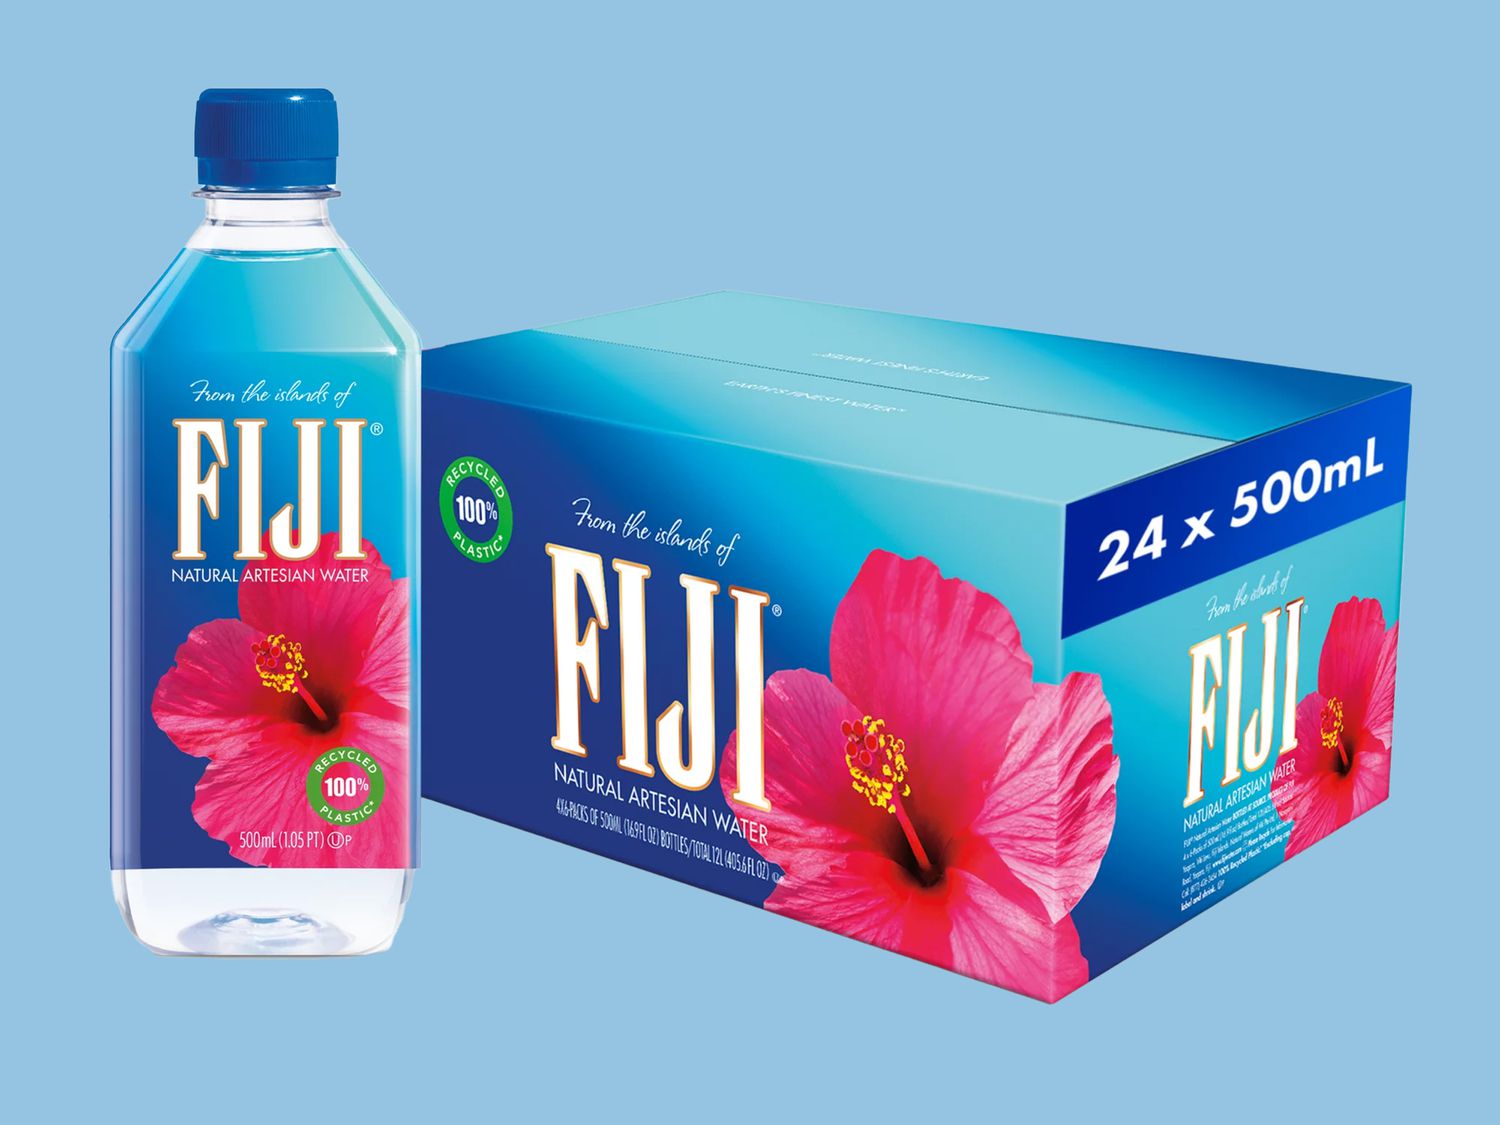 Breaking News: Nearly 2 Million FIJI Water Bottles Pulled Off Shelves Due to Health Concerns